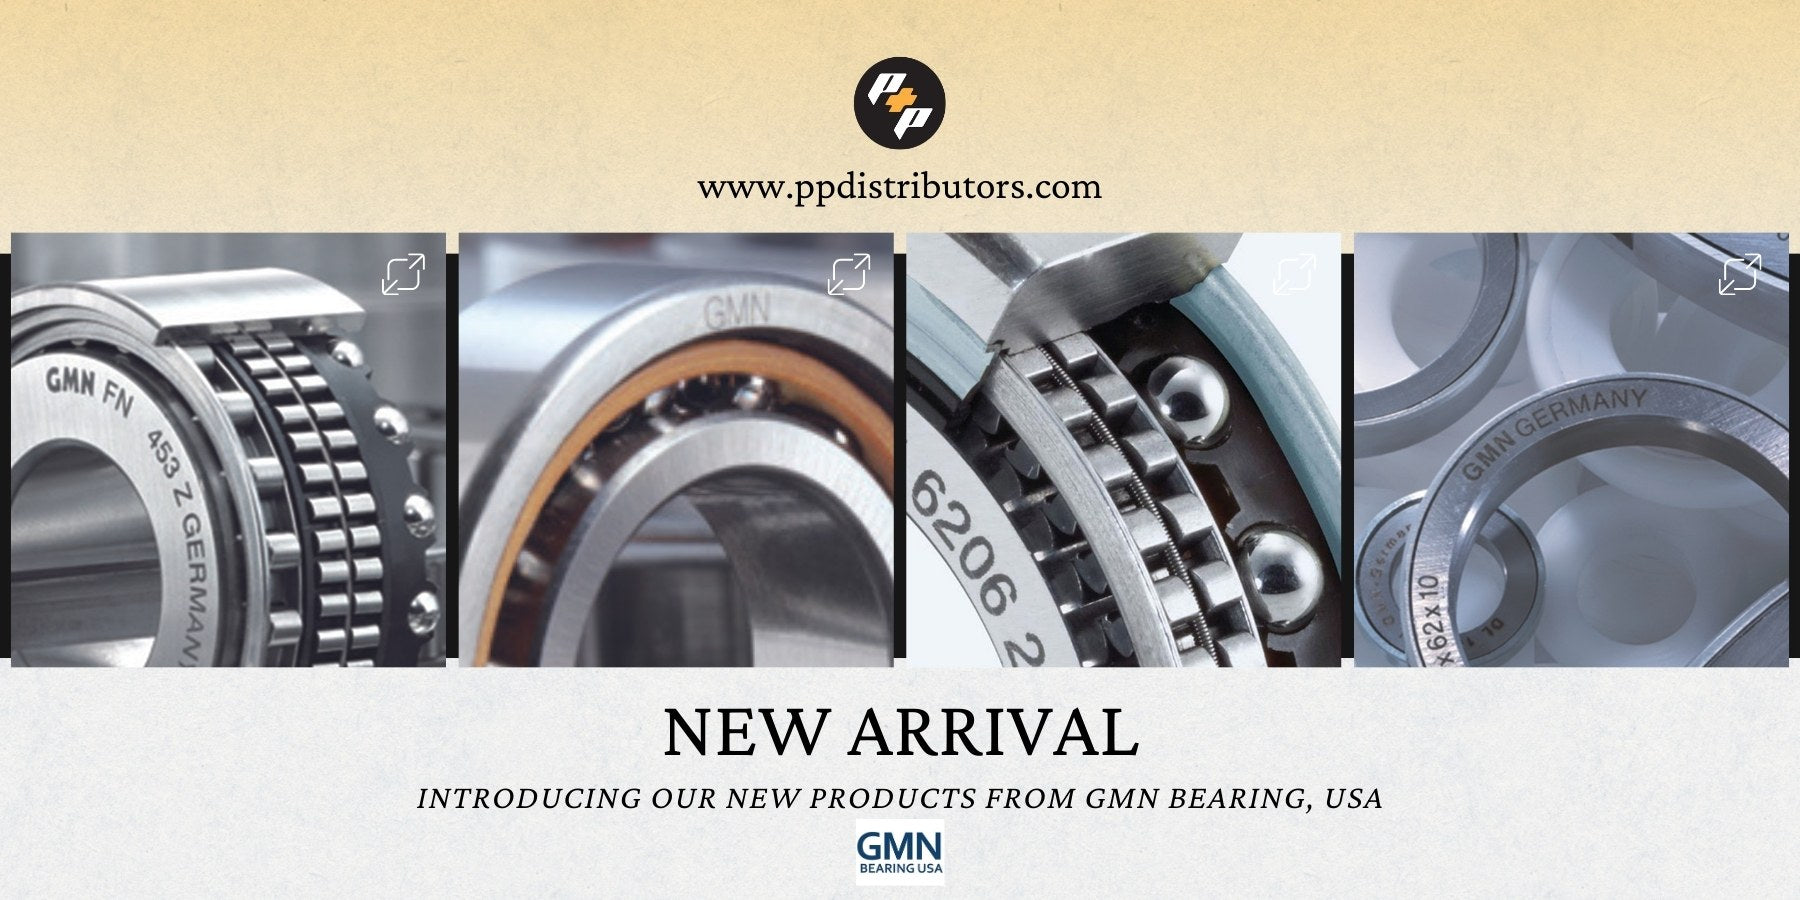 Introducing our newly available GMN Bearing, USA products